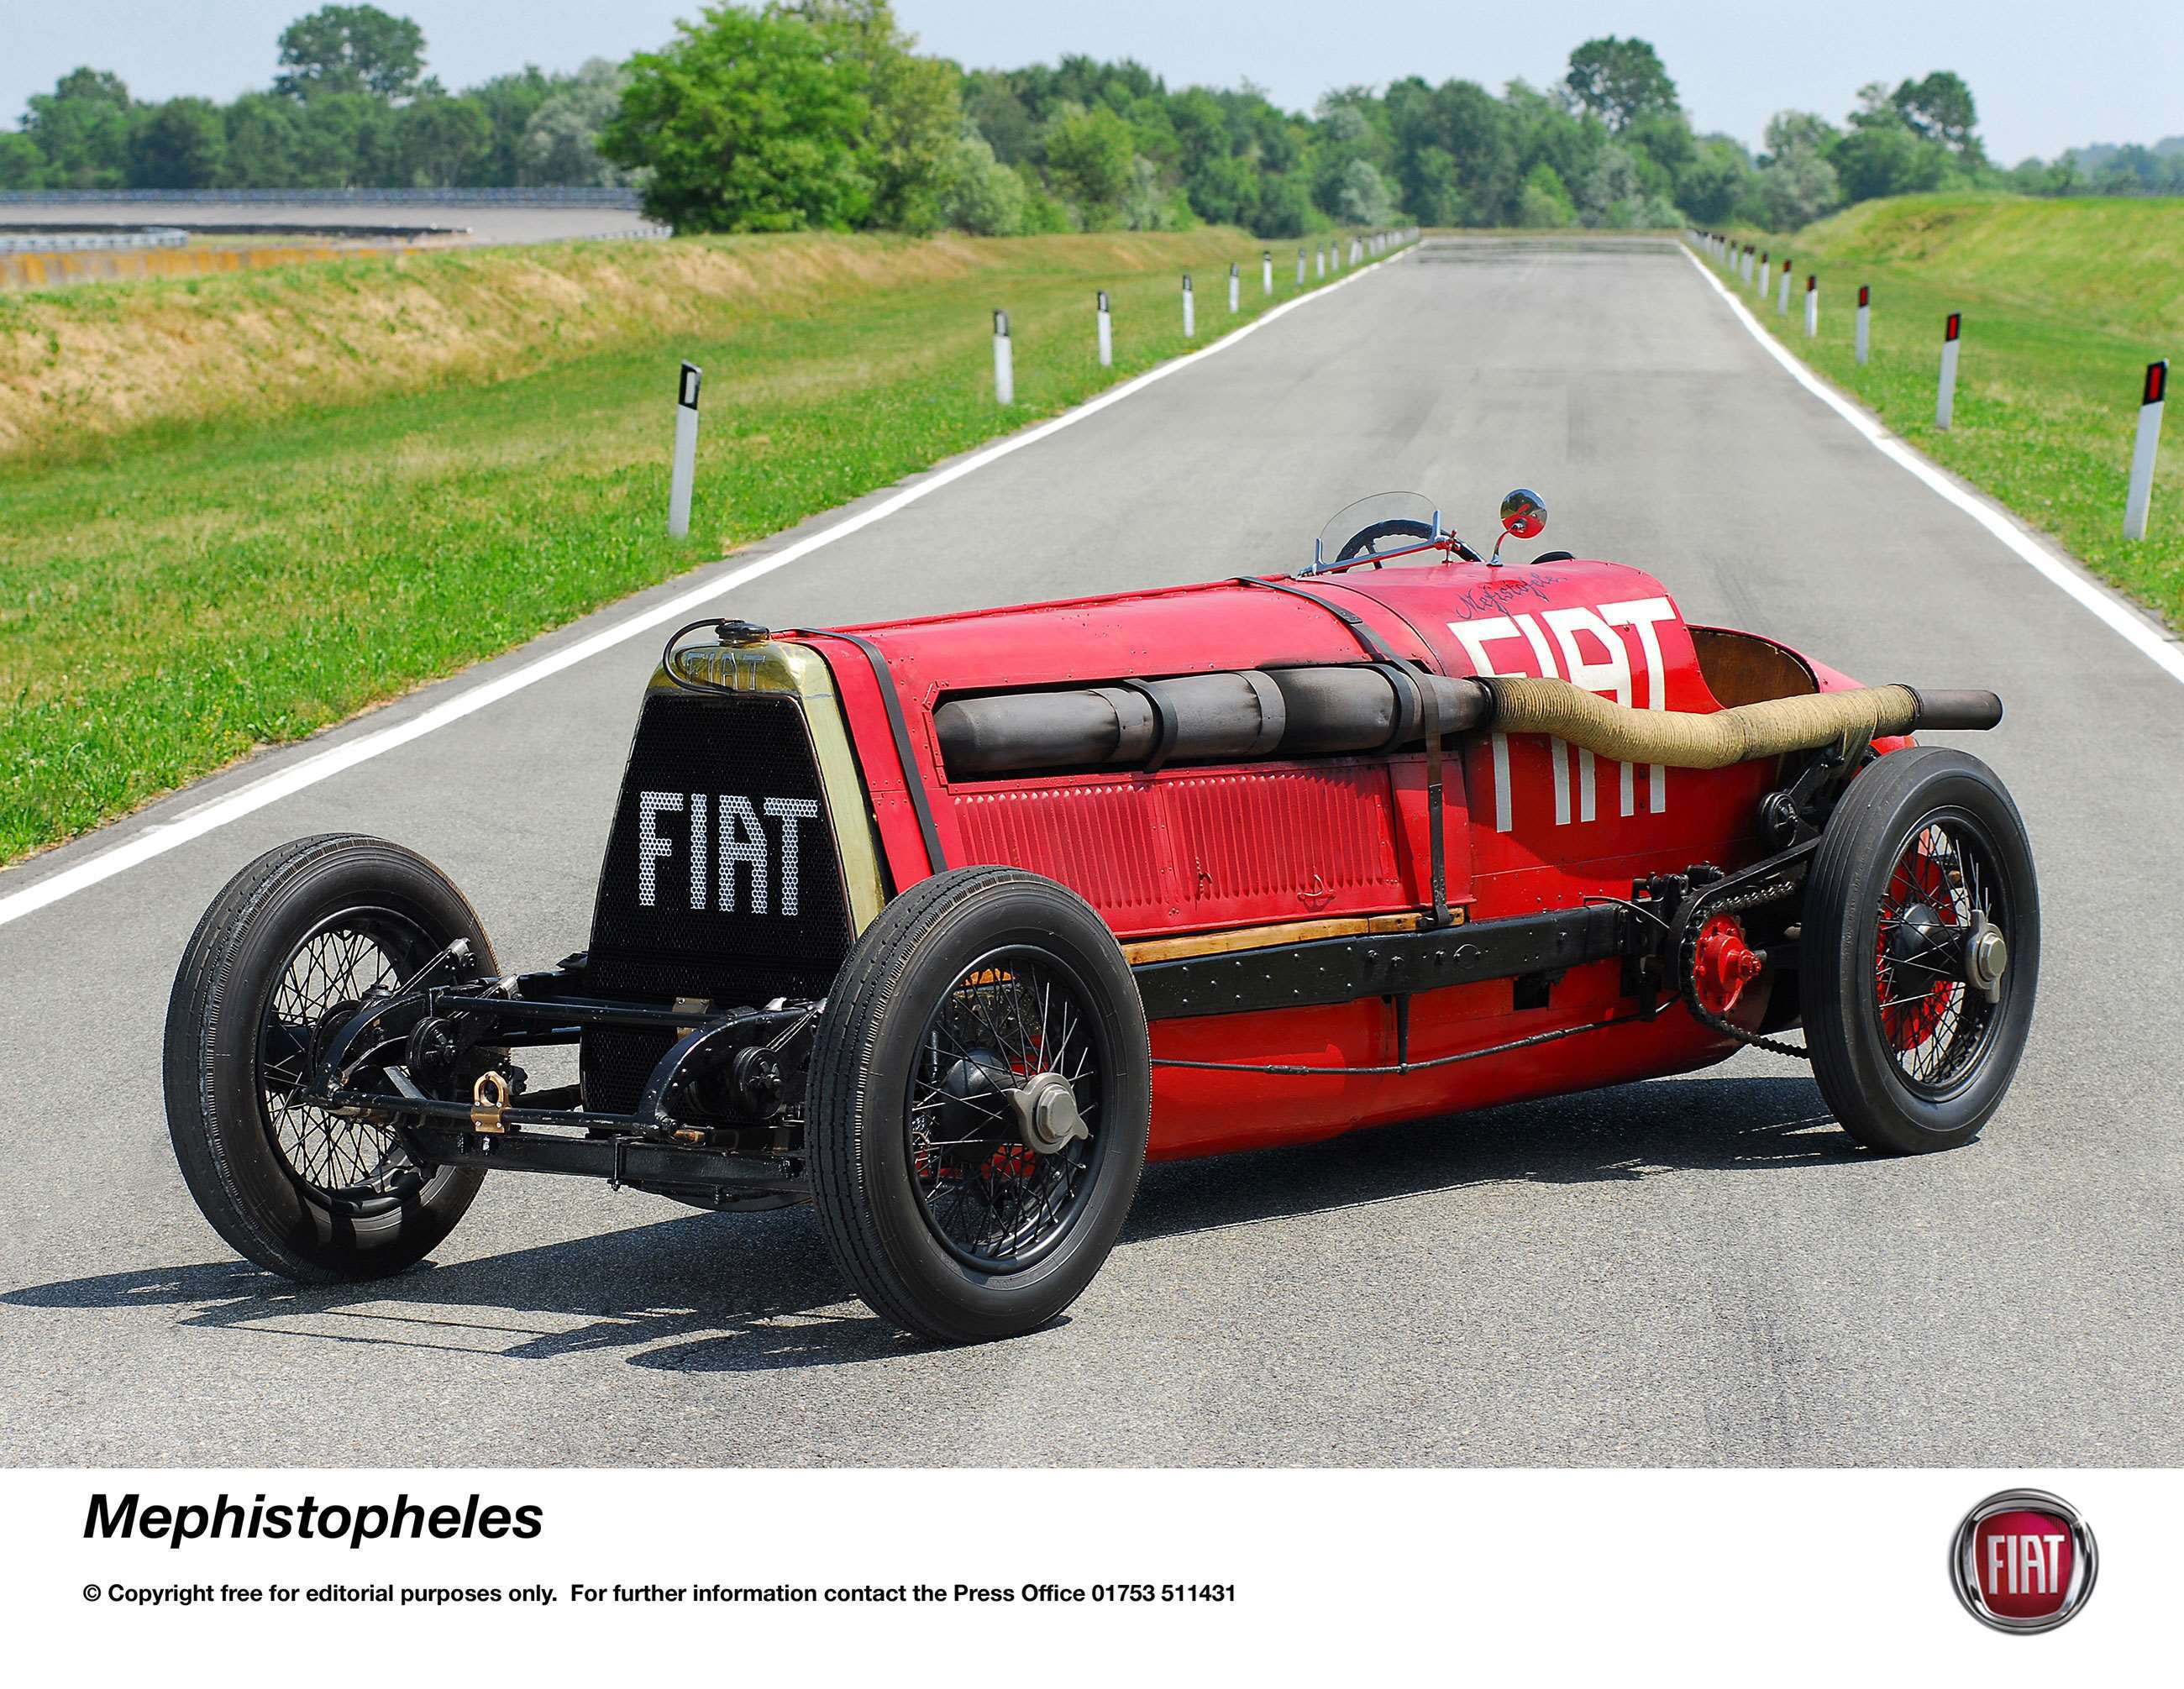 coolest-land-speed-record-cars-3-fiat-mephistopheles-goodwood-22042021.jpg